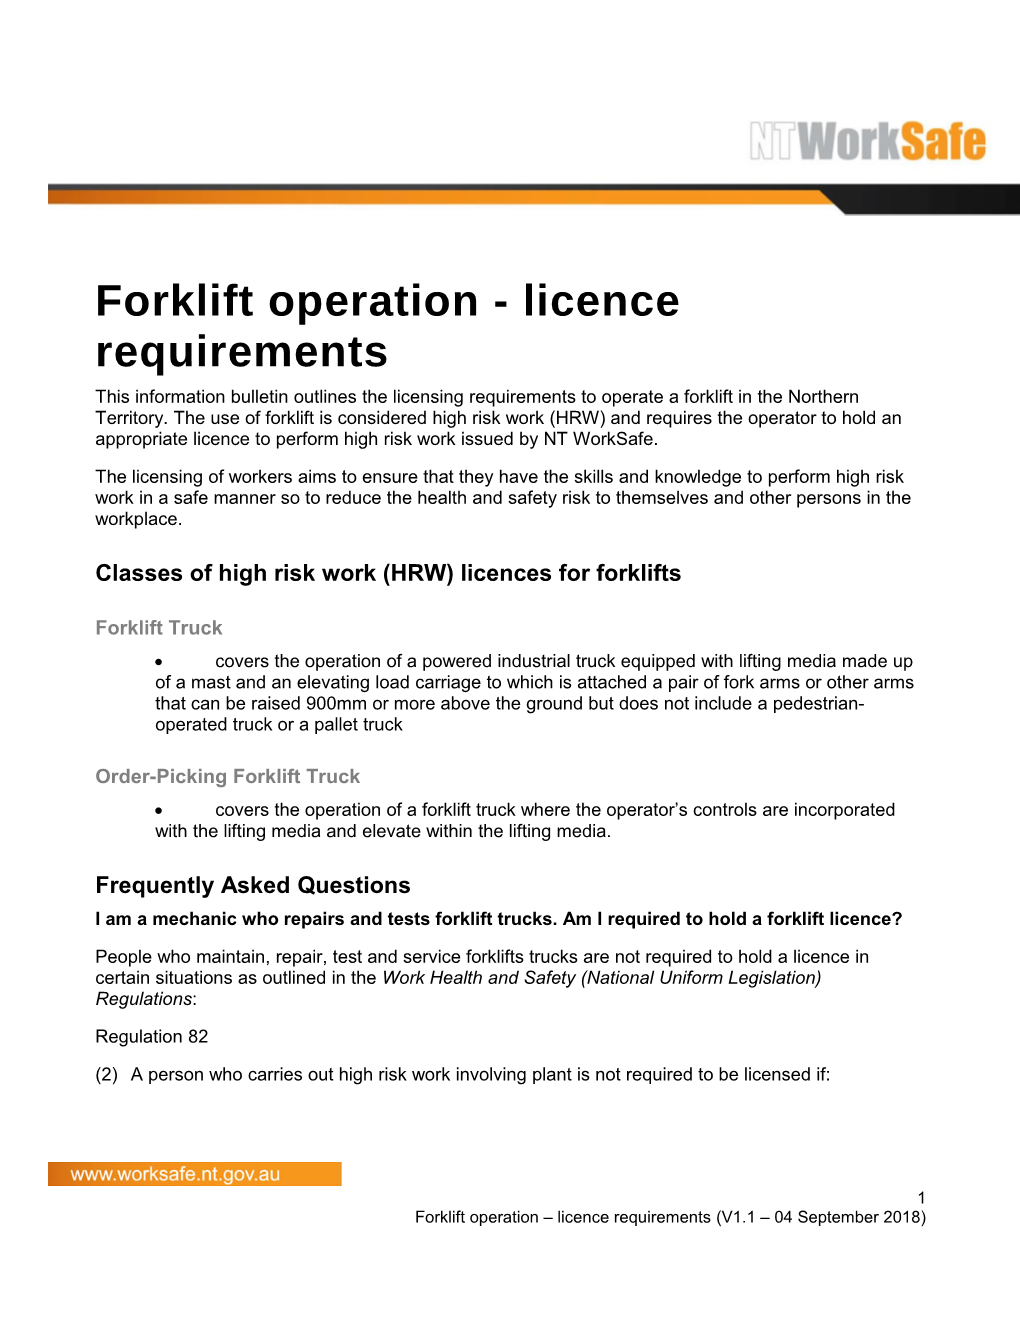 Forklift Operation - Licence Requirements